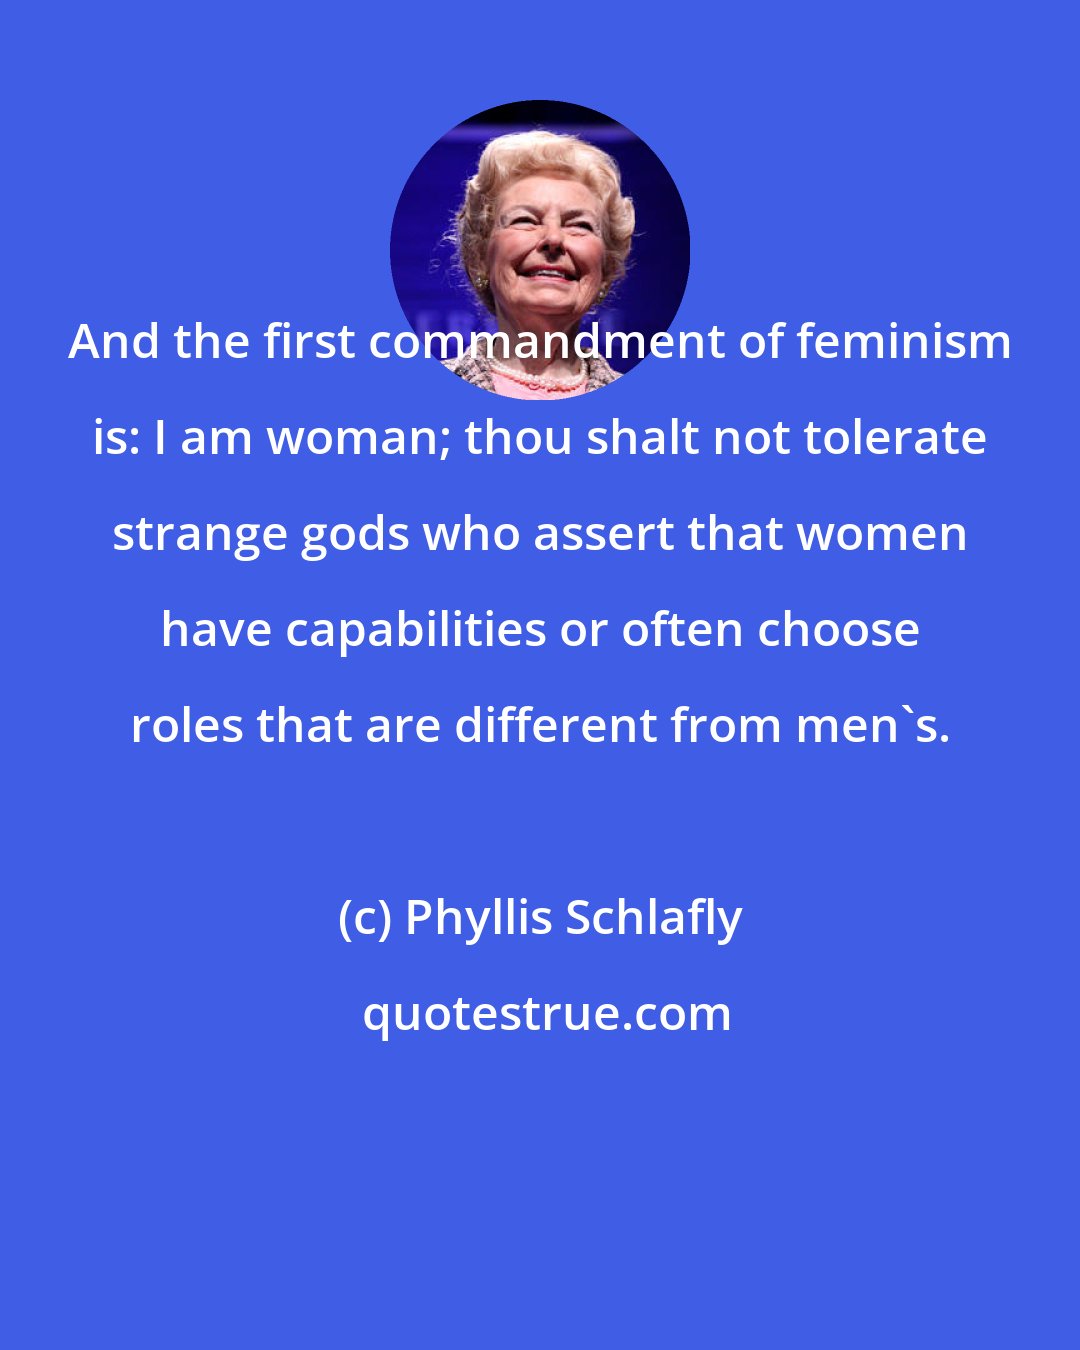 Phyllis Schlafly: And the first commandment of feminism is: I am woman; thou shalt not tolerate strange gods who assert that women have capabilities or often choose roles that are different from men's.